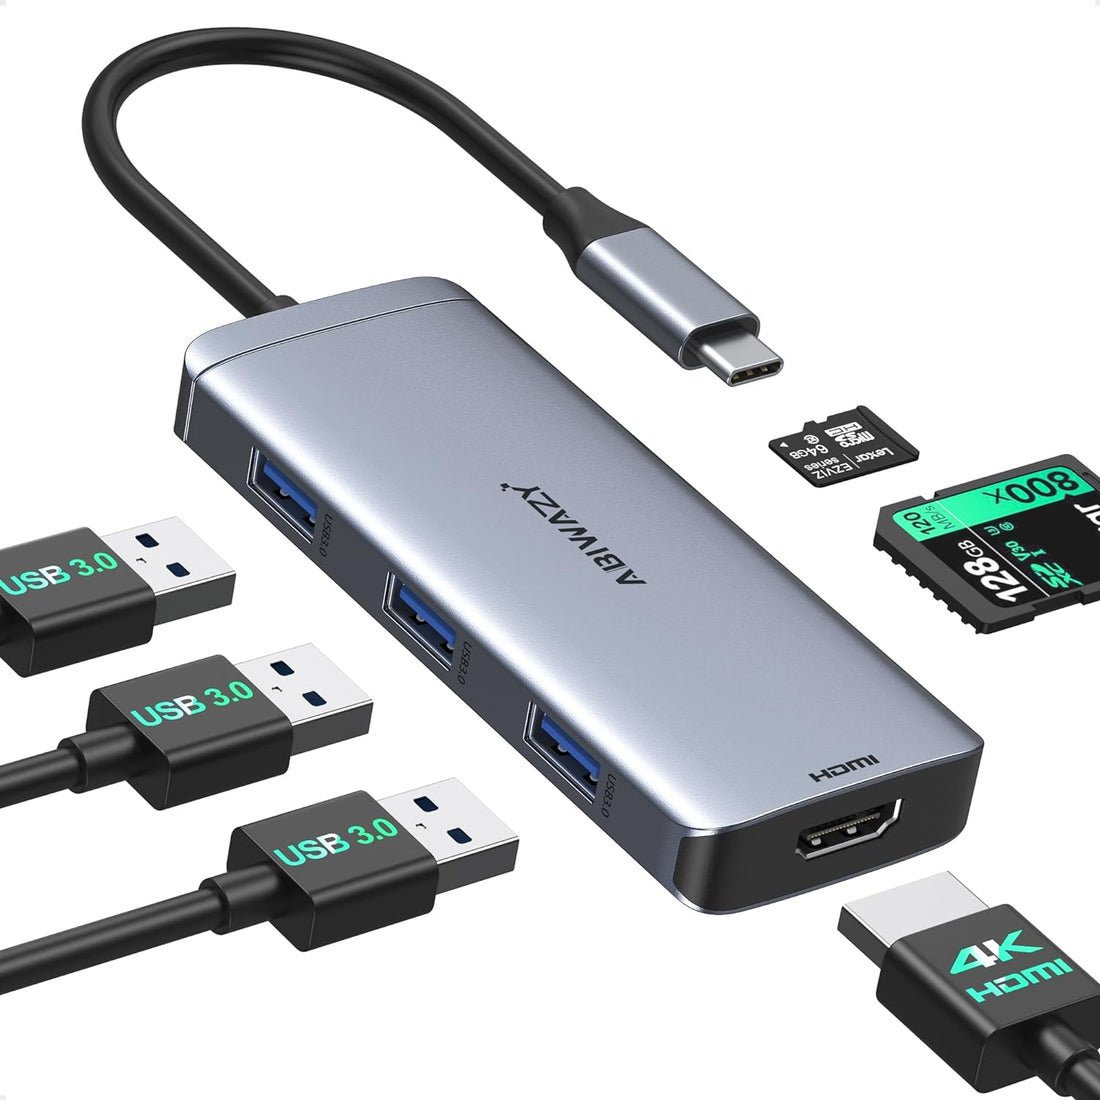 USB C Hub 6 in 1 Dongle USB-C to HDMI Multiport Adapter with 4K HDMI Output,3 USB3.0 Ports,SD/TF Card Reader,USB To USB Accessories,Universal Laptop Dock For MacBook Air/Pro,Dell XPS,HP,Lenovo,Surface